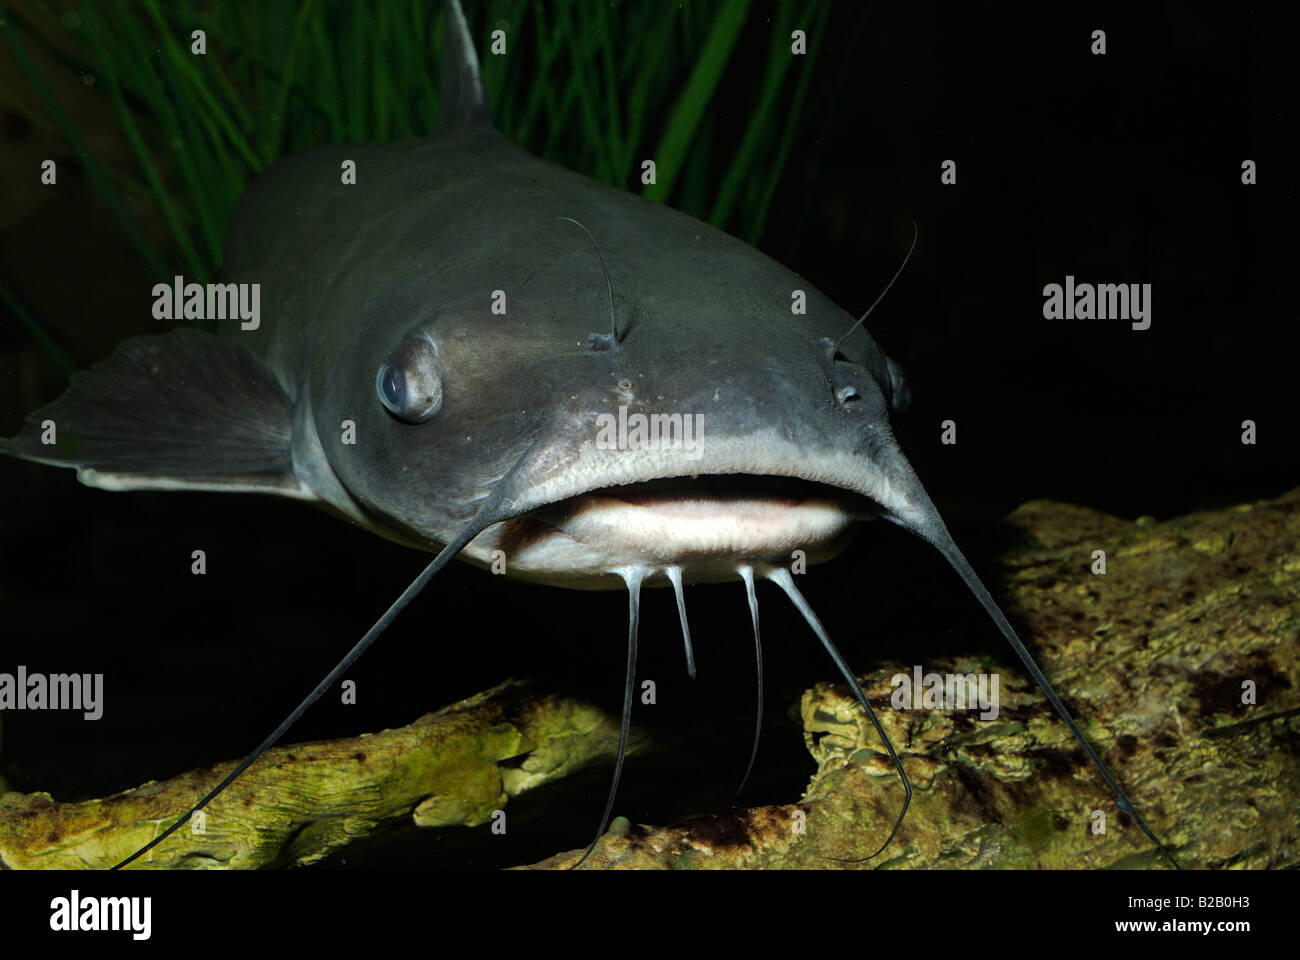 Fish Rules - Catfish, Channel in FL State Waters